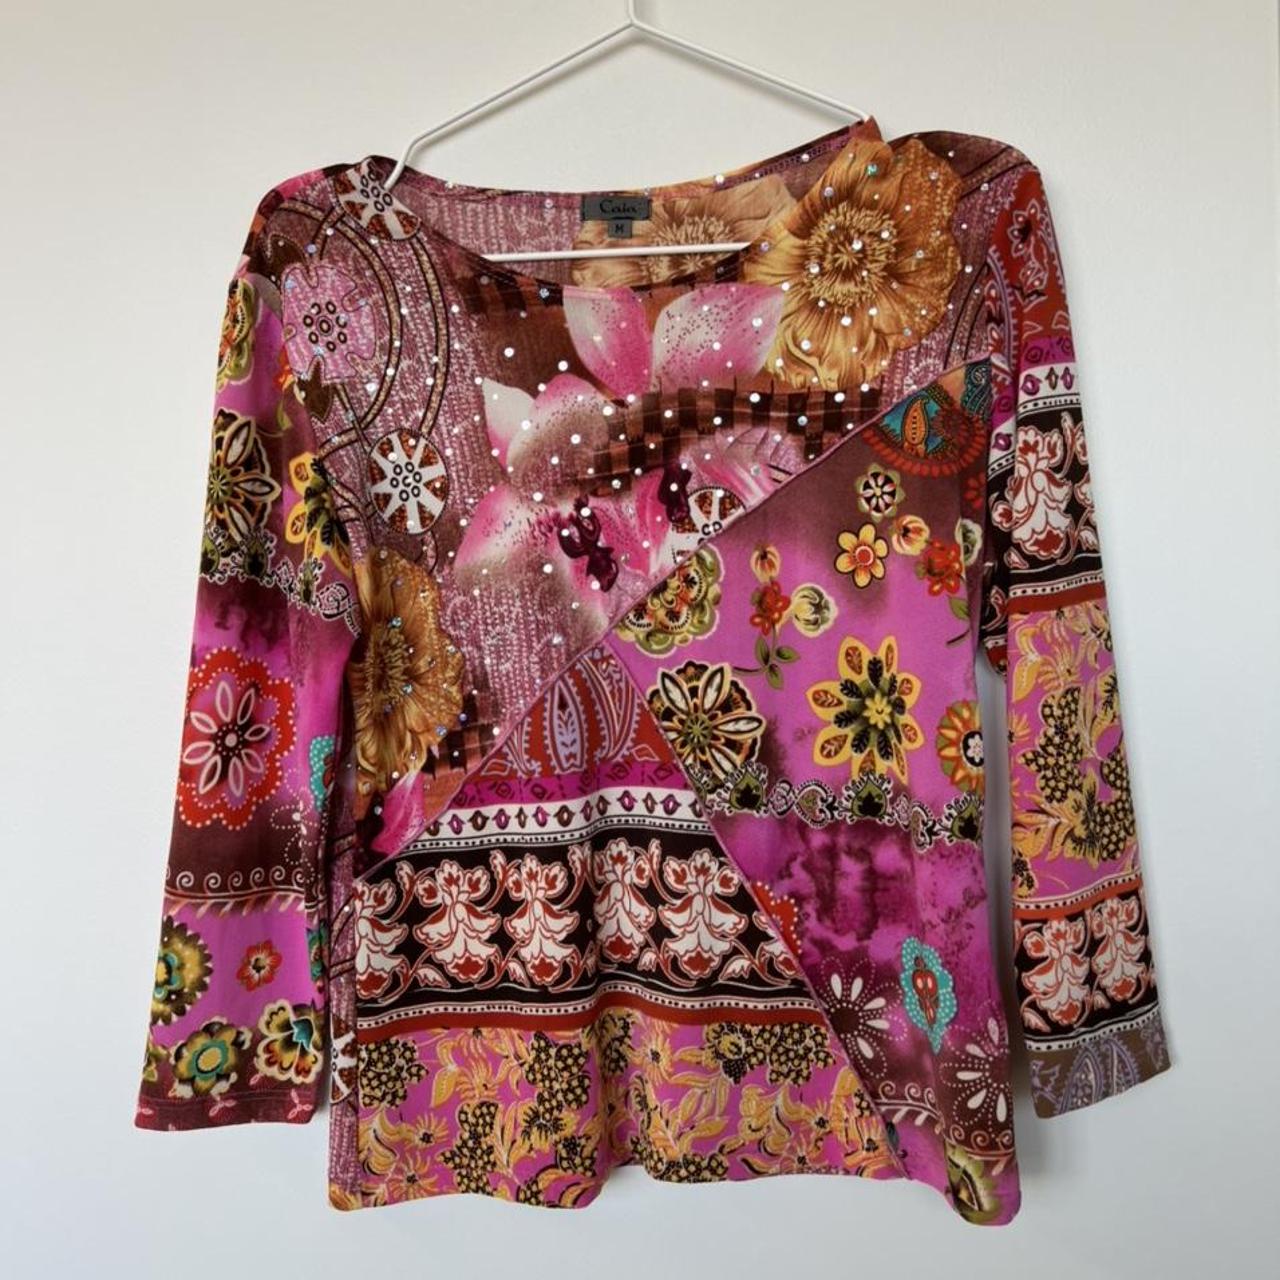 Product Image 1 - Gorgeous rare Y2K top! Size